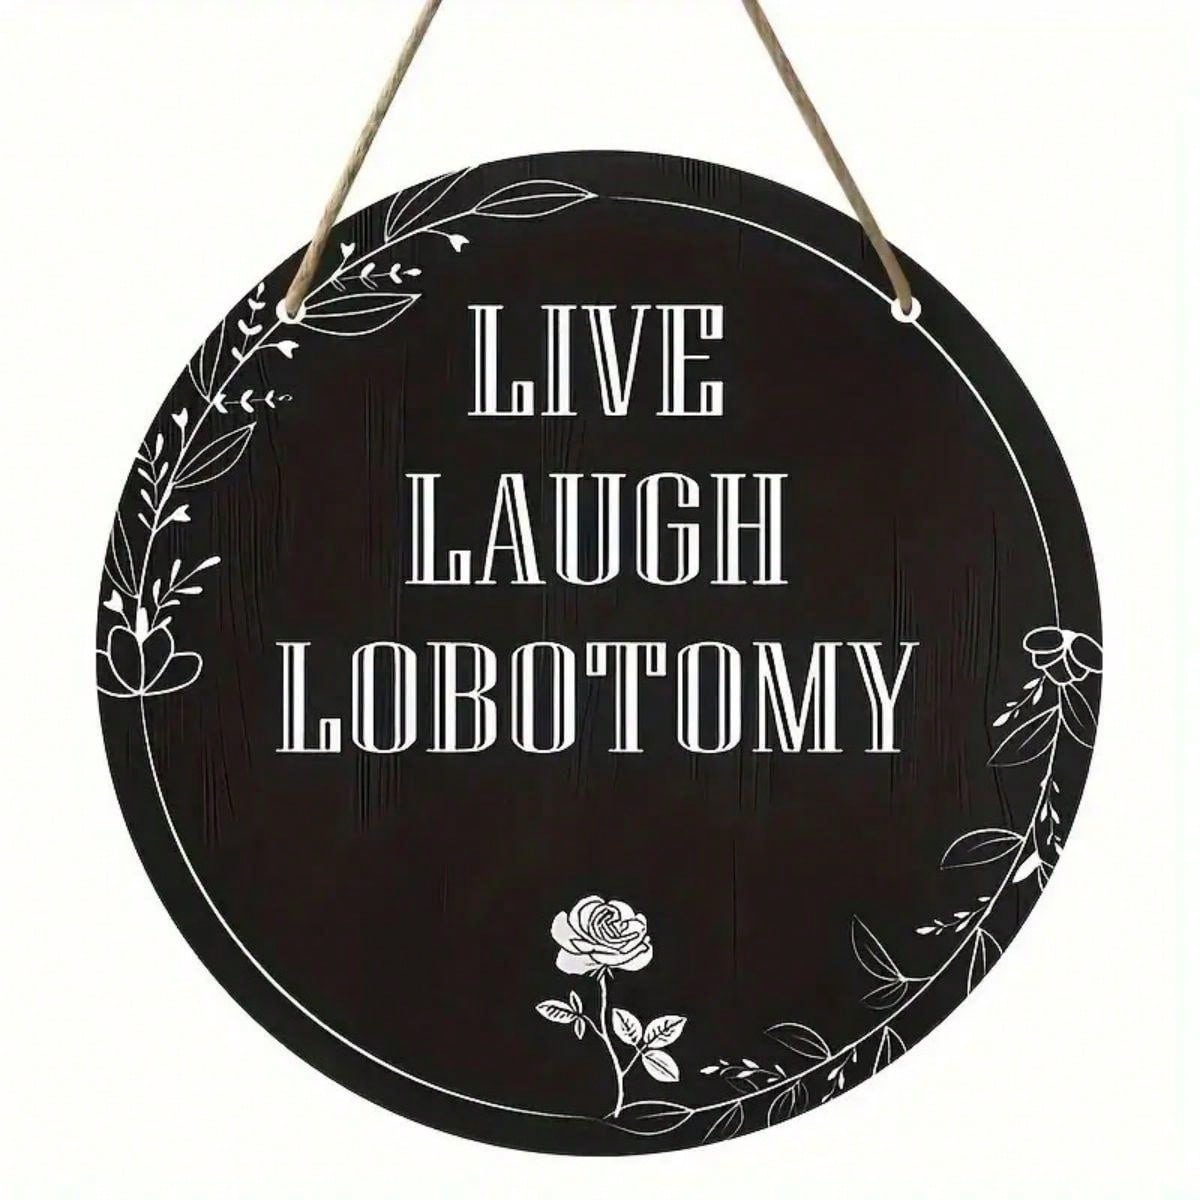 Funny Black Gothic Home Decor 'Live Laugh Love' Sign -  8*8in